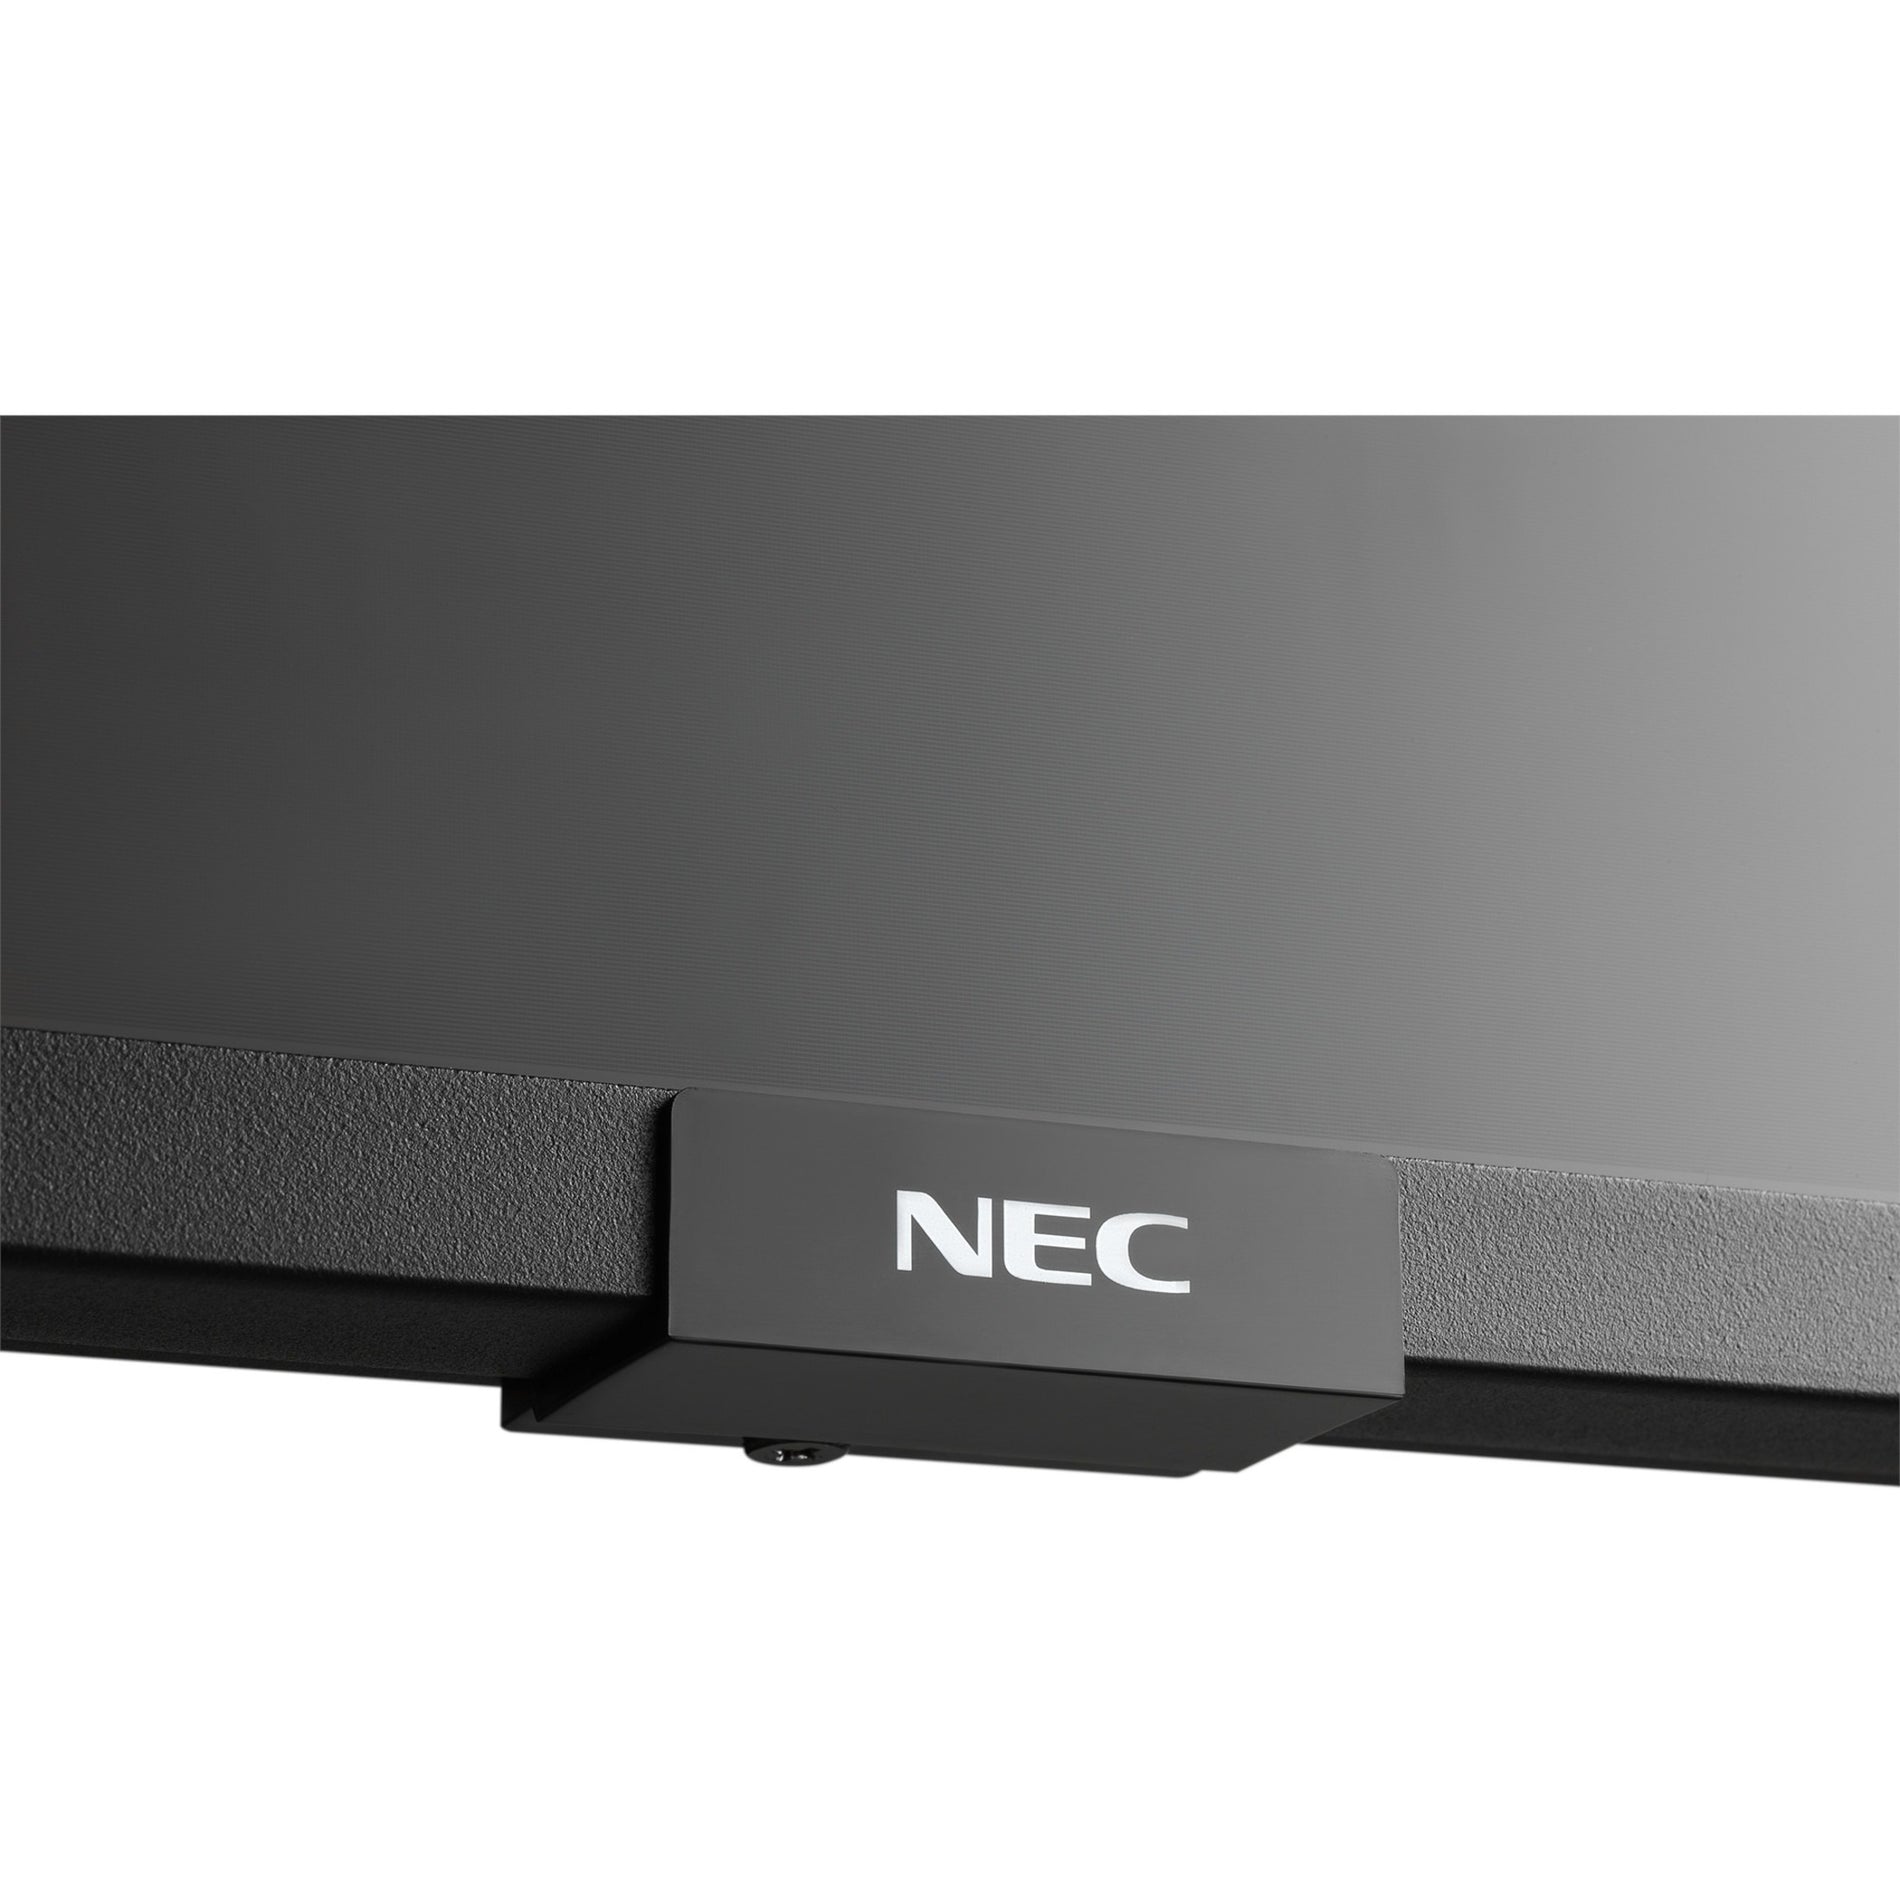 NEC Display ME651-PT 65" Ultra High Definition Commercial Display with PCAP Touch, 400 Nit, 2160p, 3 Year Warranty, Energy Star, USB, HDMI, Serial, DisplayPort, Intel Processor, Ethernet